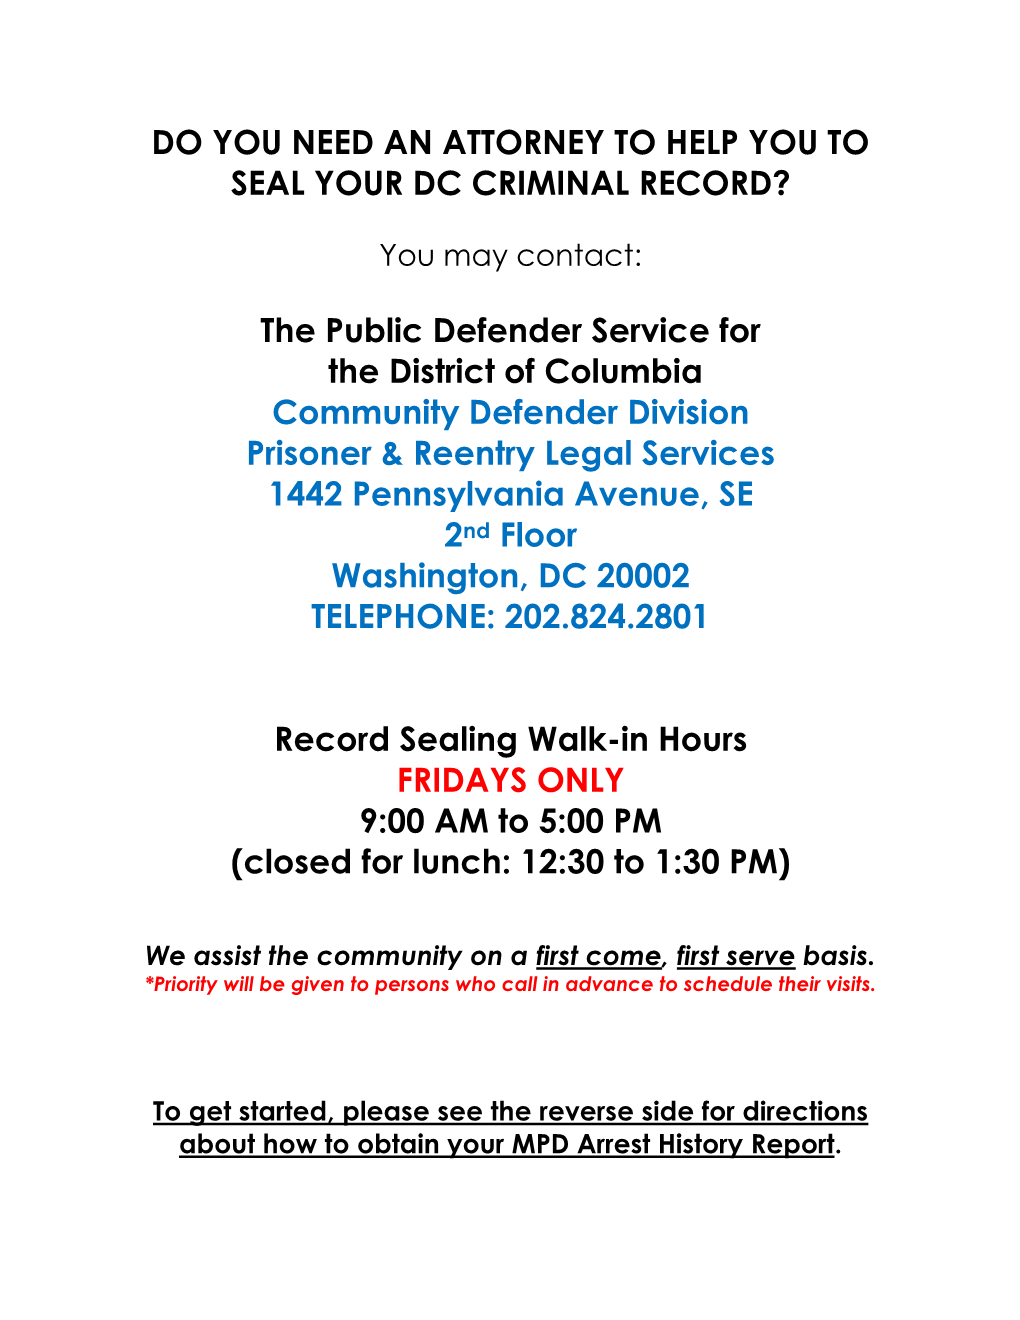 Do You Need an Attorney to Help You to Seal Your Dc Criminal Record?